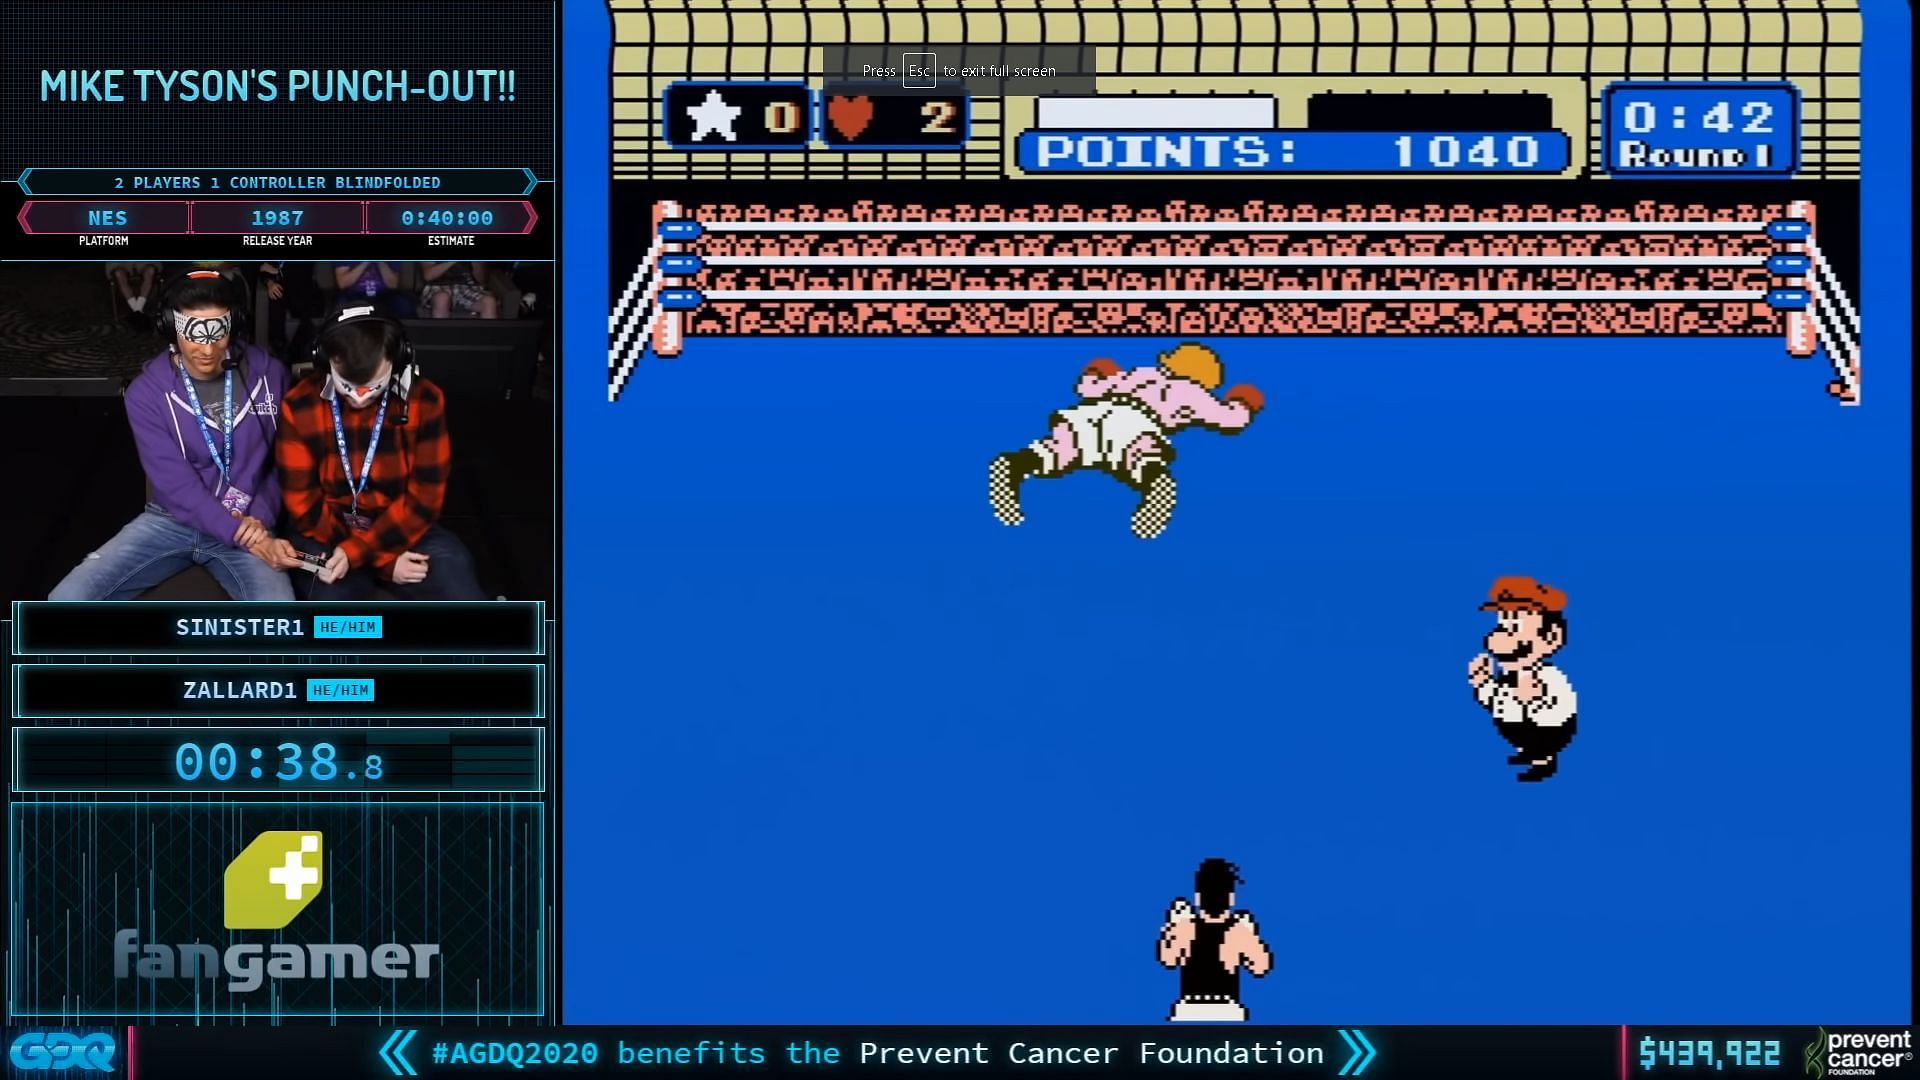 Mike Tyson&rsquo;s Punch-Out, blinded-folded (Image via Games Done Quick YouTube)